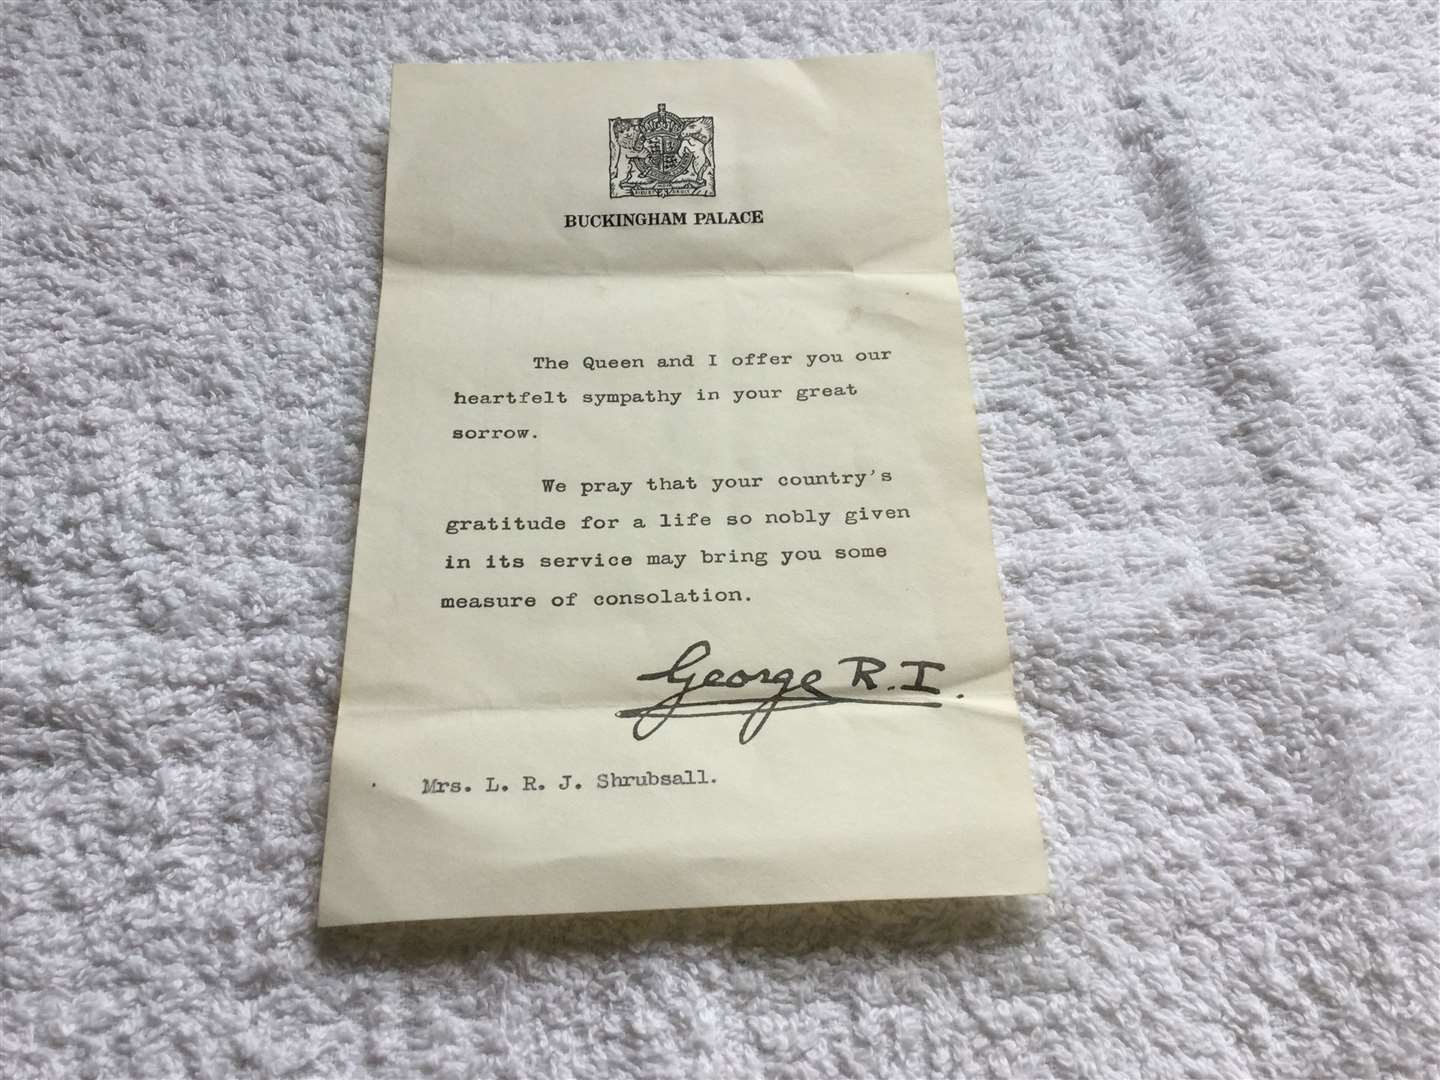 The King wrote to Sgt Shrubsall’s family